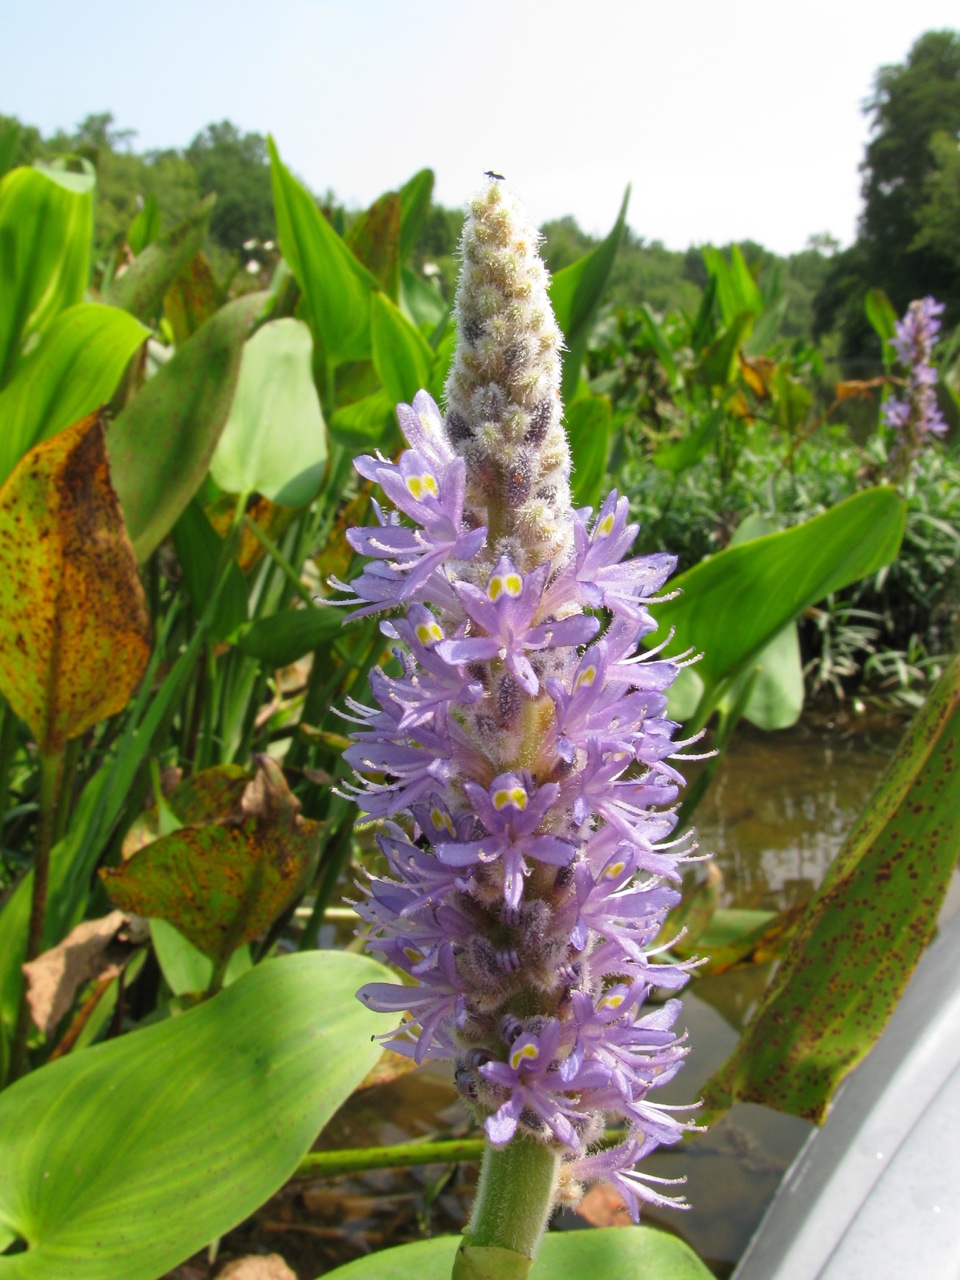 The Scientific Name is Pontederia cordata. You will likely hear them called Pickerelweed. This picture shows the Close-up of flower spike of Pontederia cordata